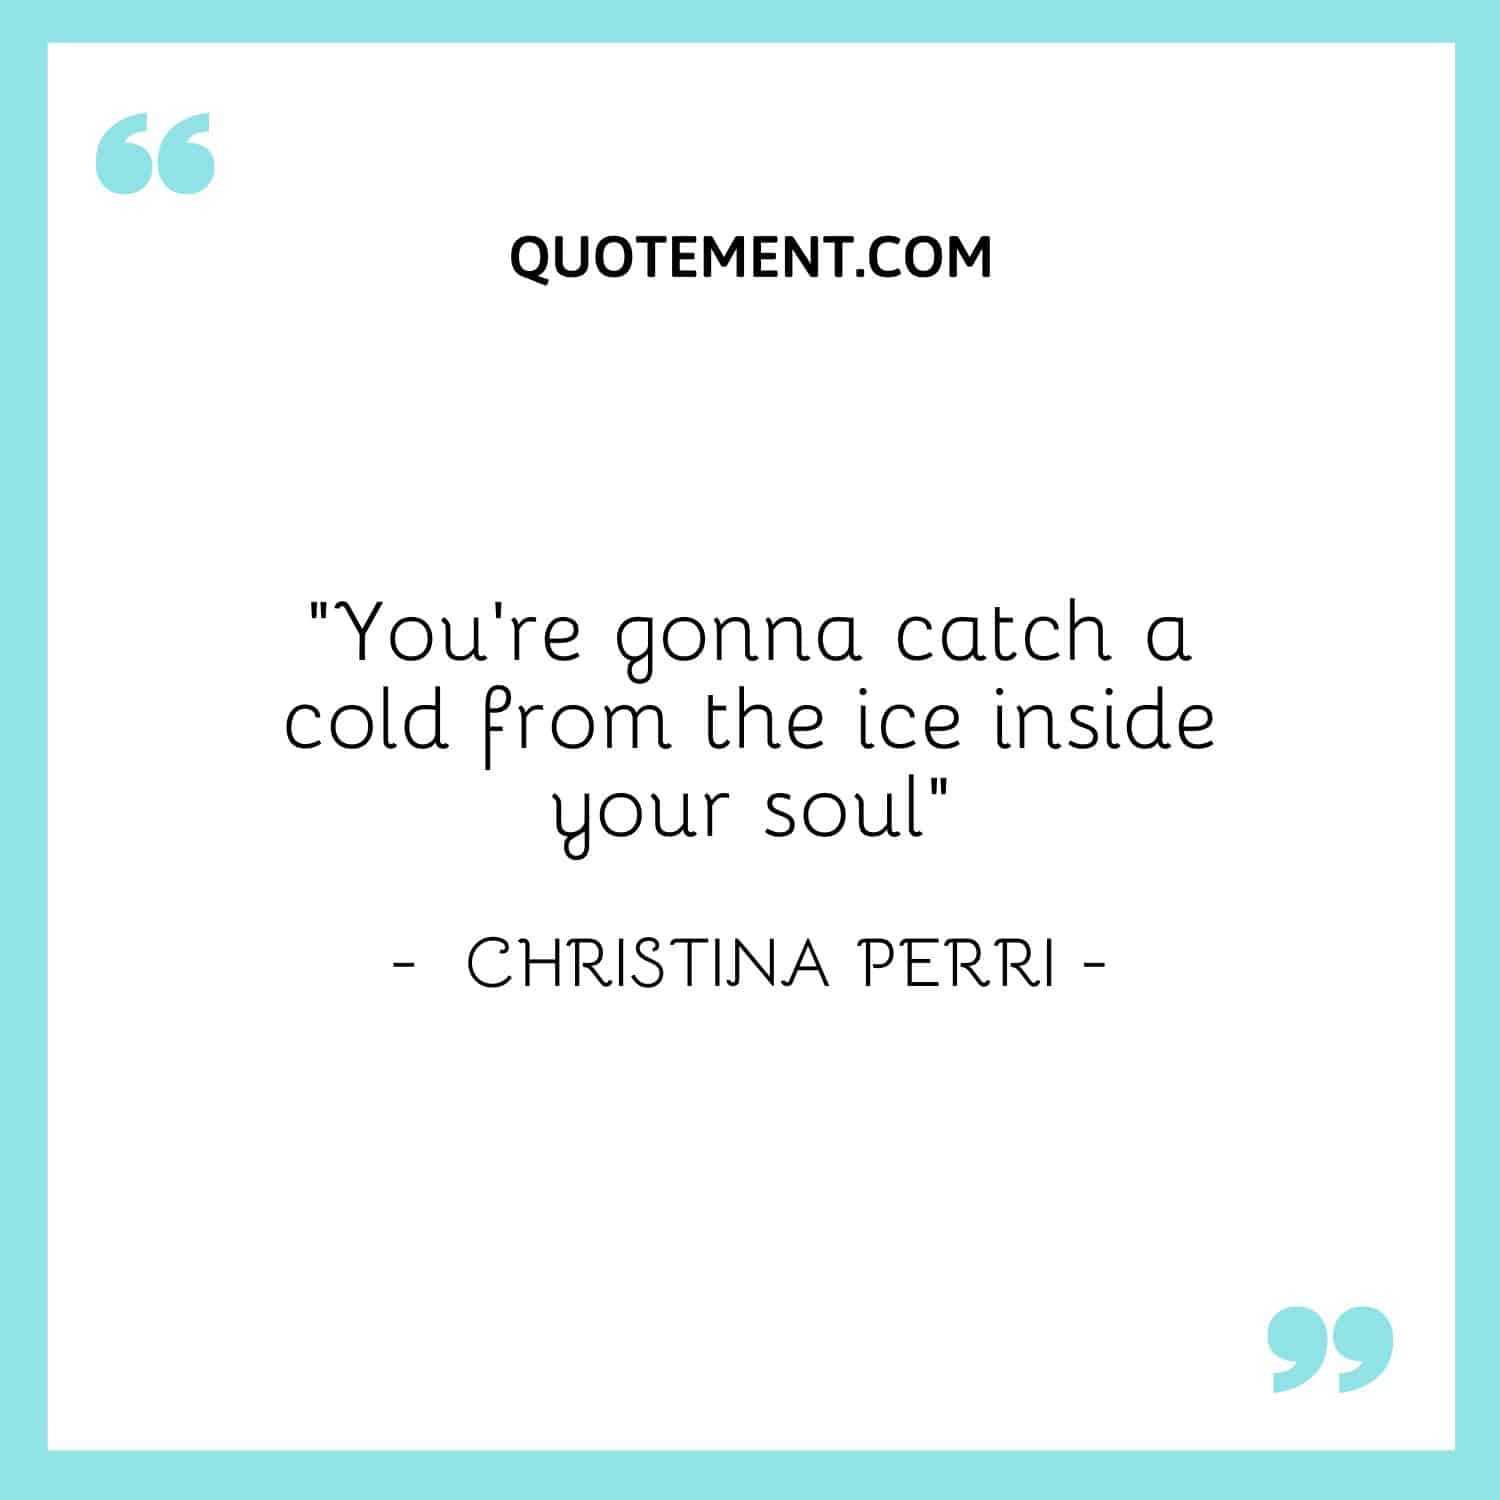 You're gonna catch a cold from the ice inside your soul